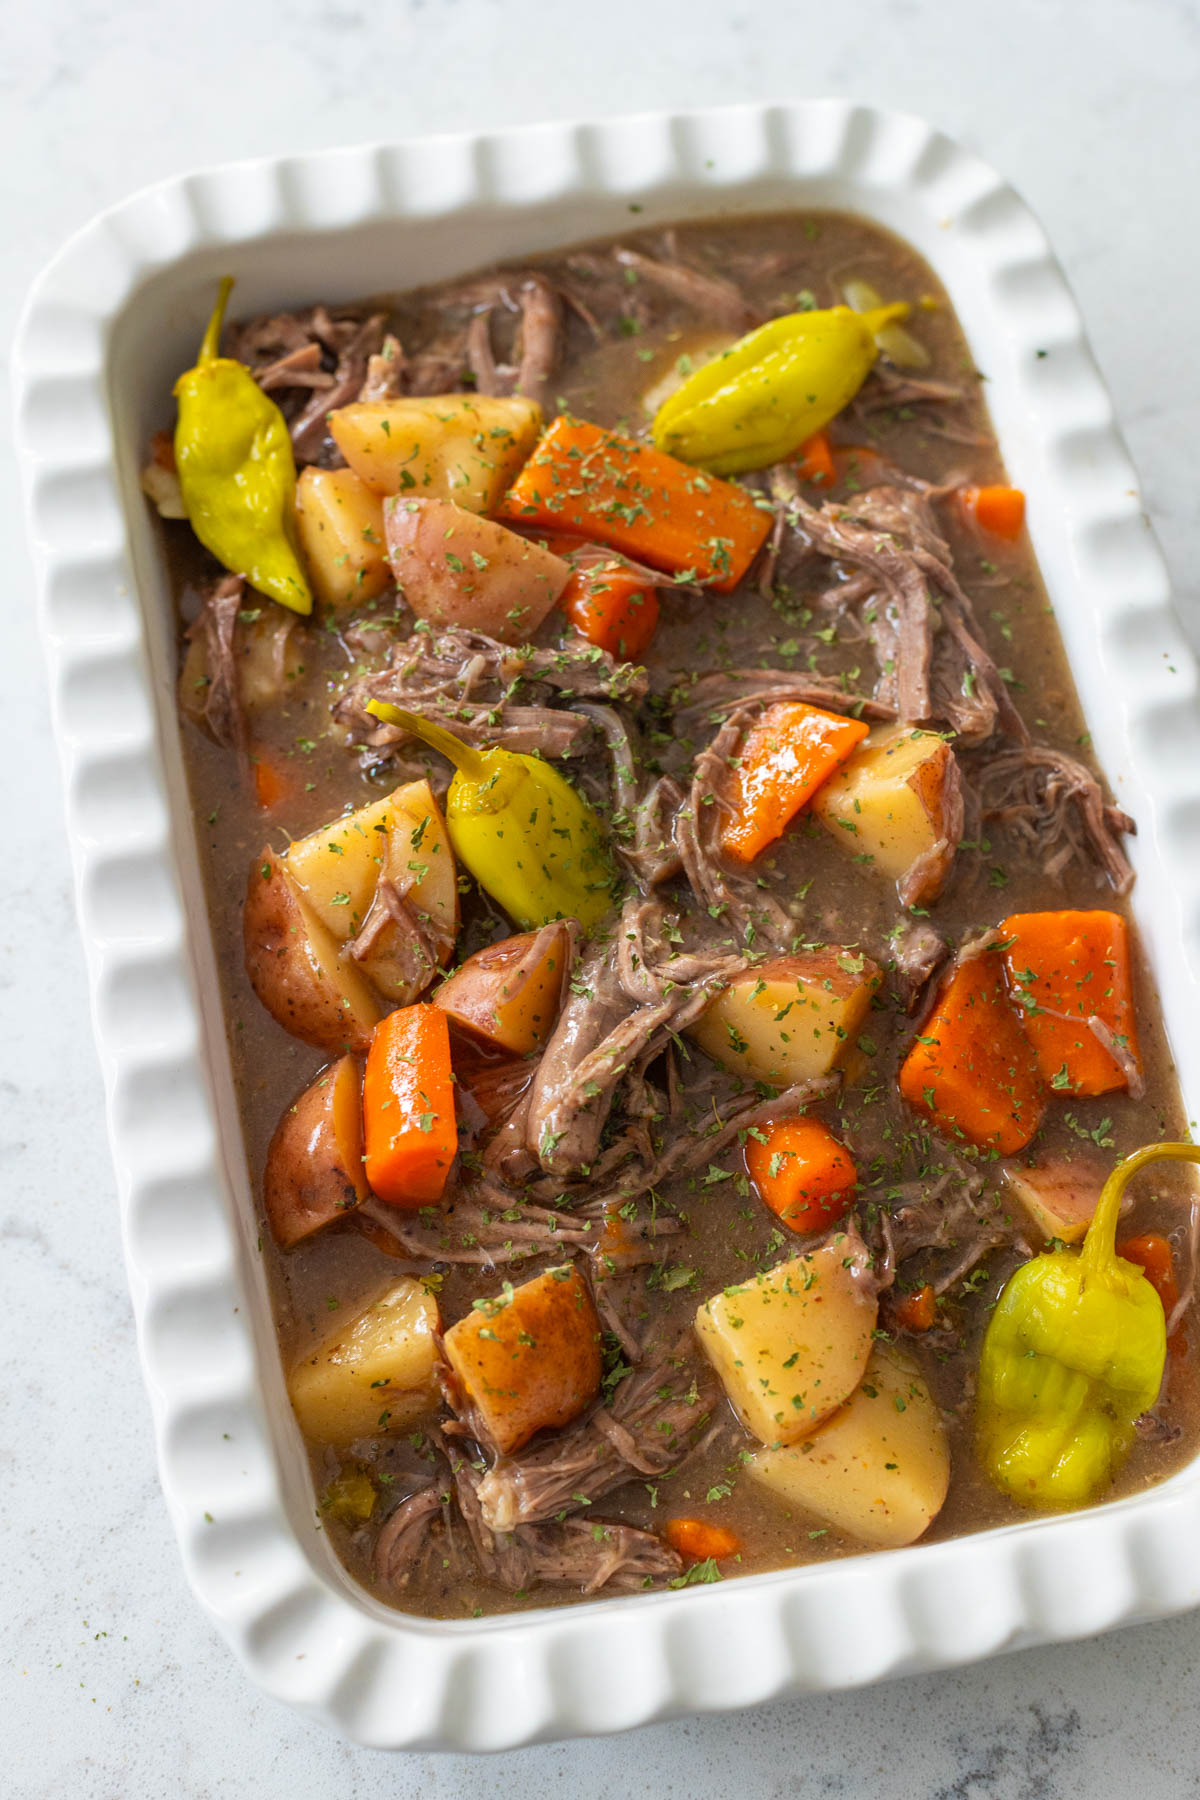 The finished pot roast mixture has been spooned into a baking dish for serving at the table. You can see large chunks of potatoes and carrots, pepperoncini peppers, and tender portions of shredded beef in a thick, rich gravy.